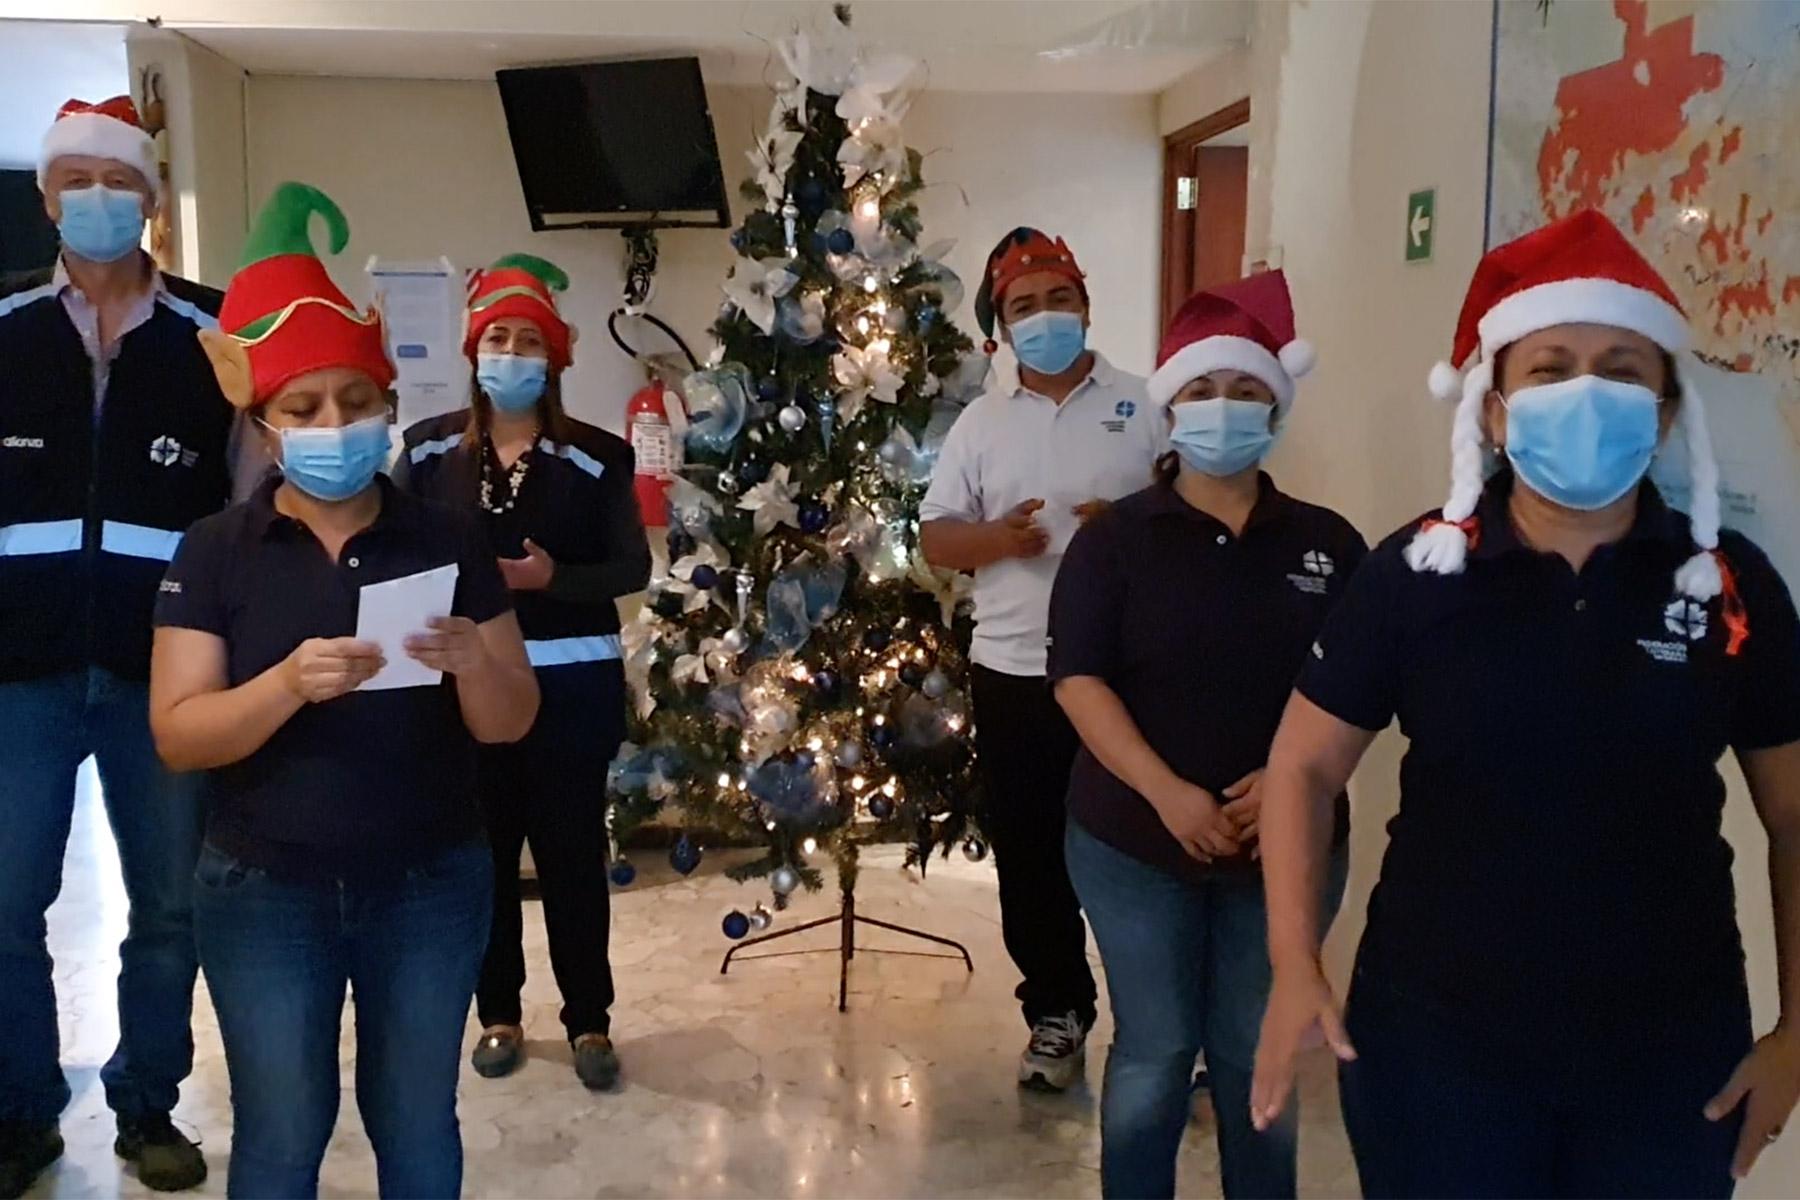 The LWF World Service Central America team, performing a hymn in the main office in San Salvador. Photo: LWF Central America